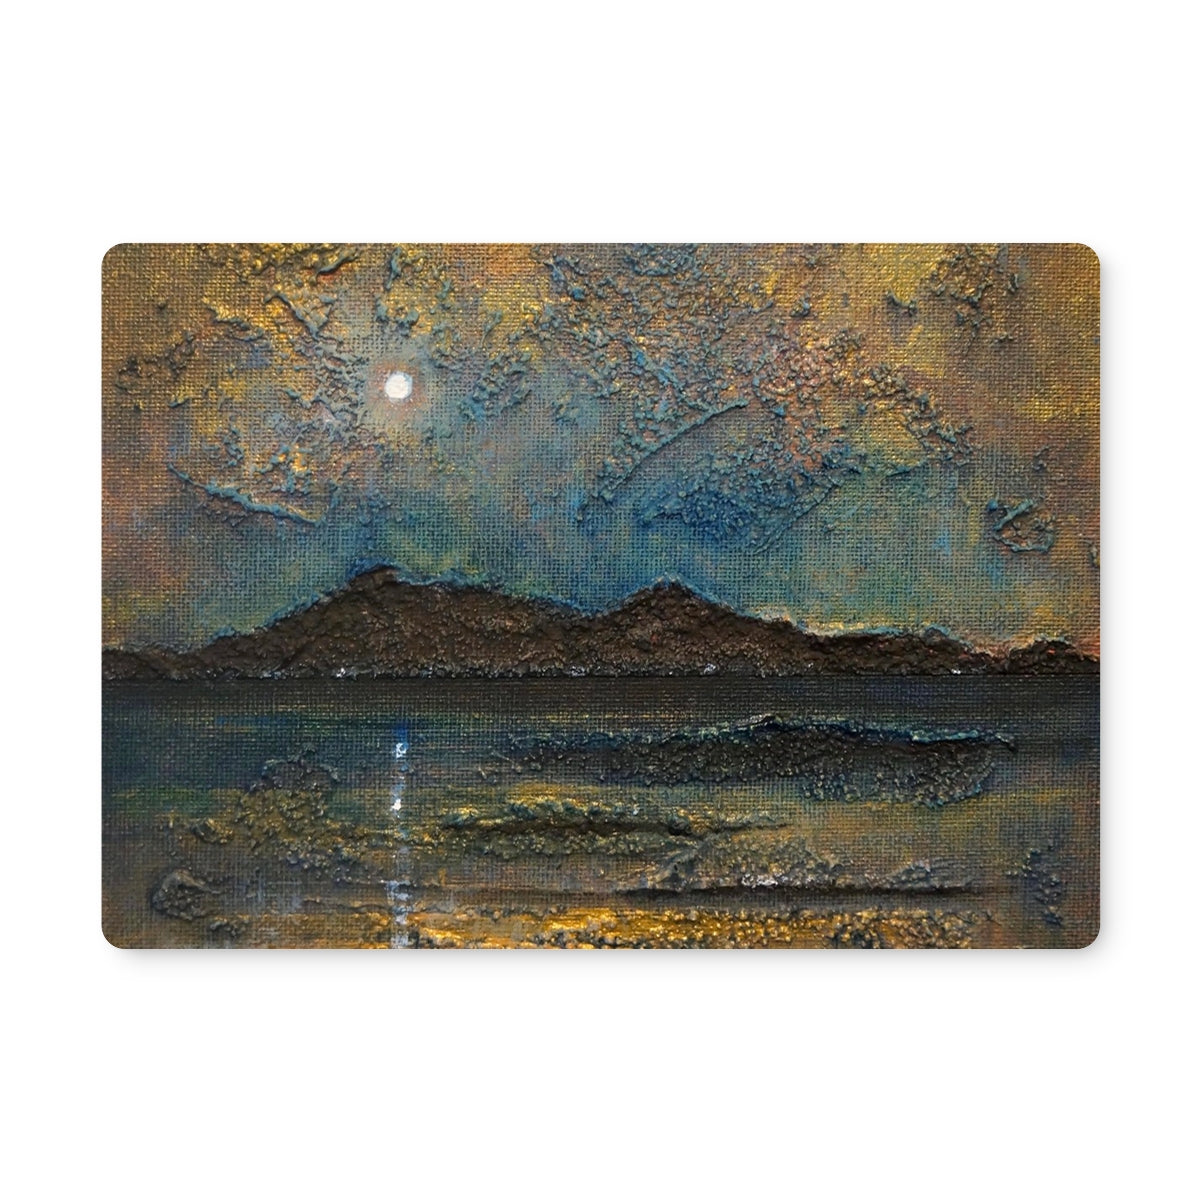 Arran Moonlight Art Gifts Placemat-Placemats-Arran Art Gallery-2 Placemats-Paintings, Prints, Homeware, Art Gifts From Scotland By Scottish Artist Kevin Hunter